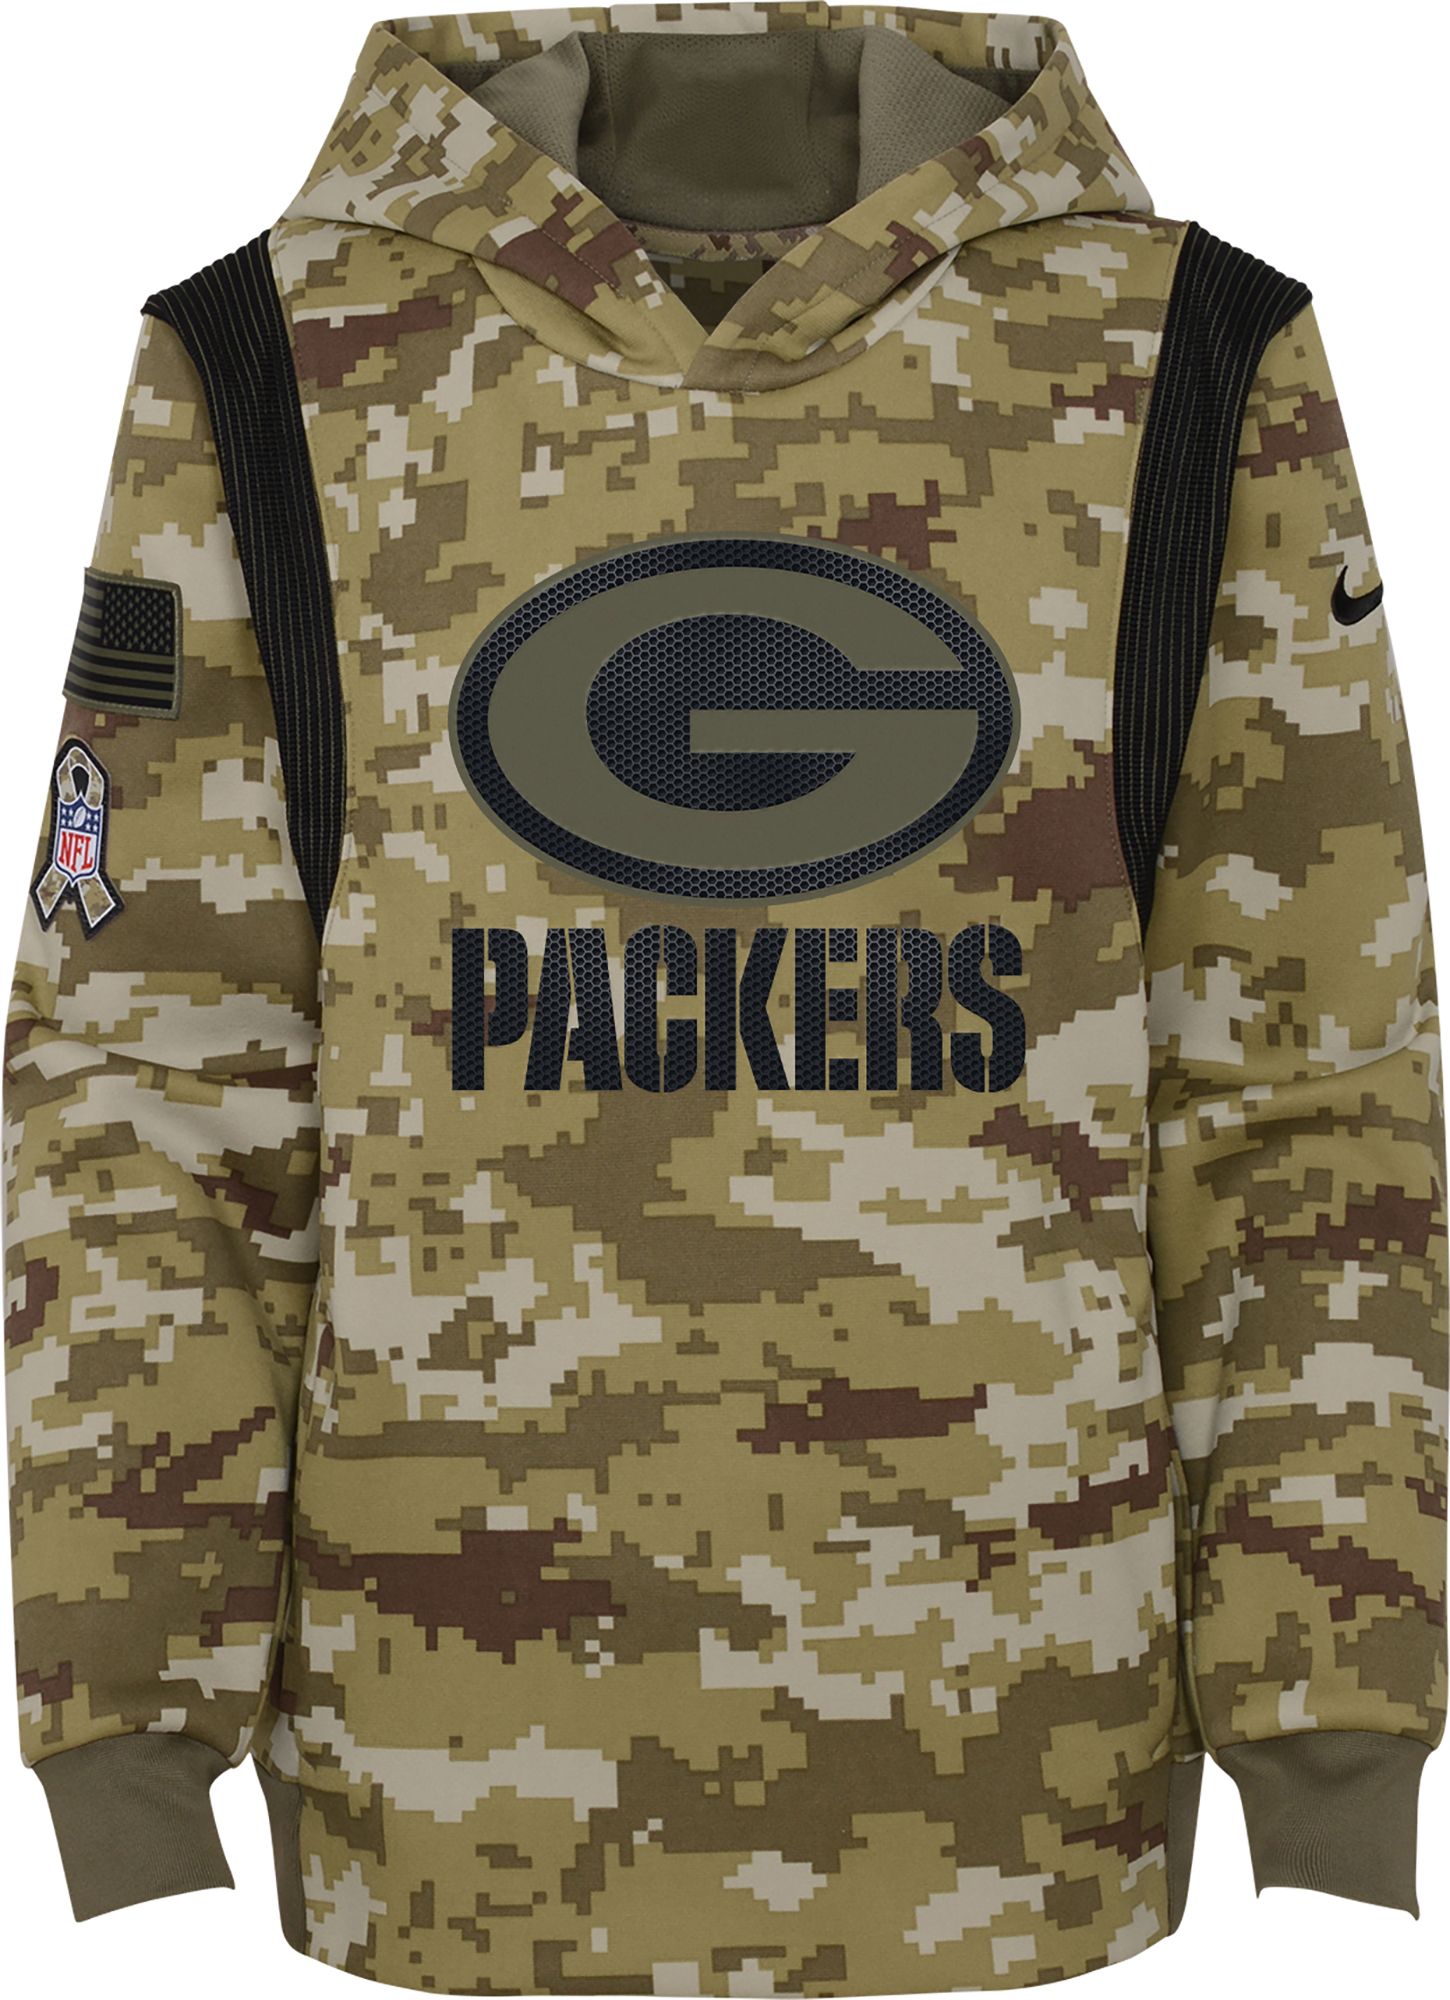 green bay packers clothing near me